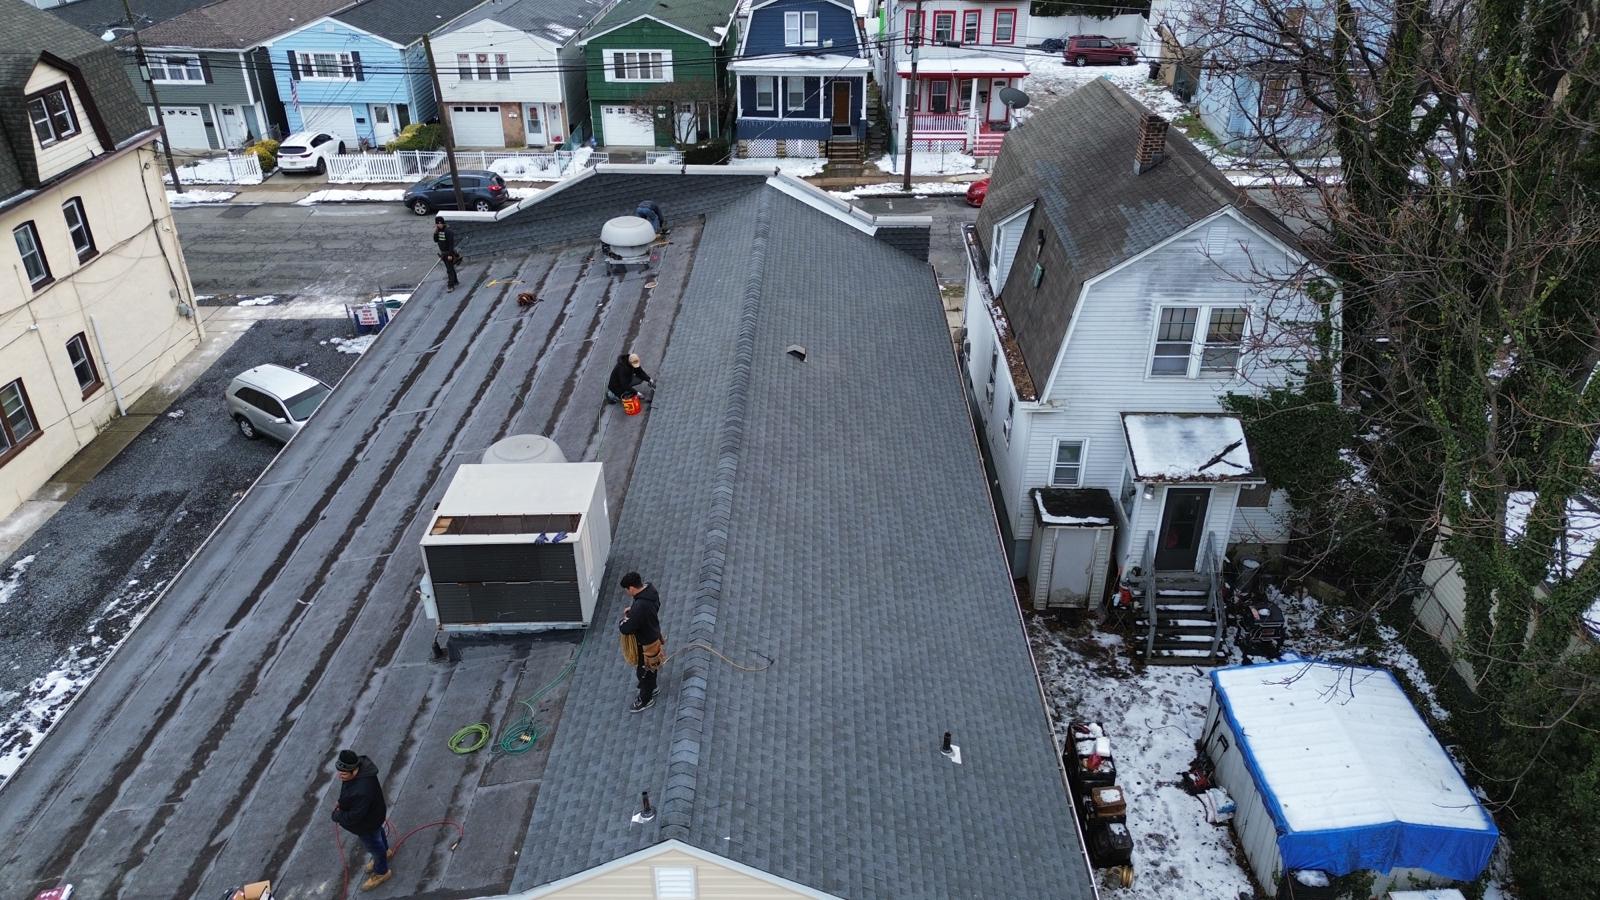 New Roof Installation in Perth Amboy NJ Project Shot 16